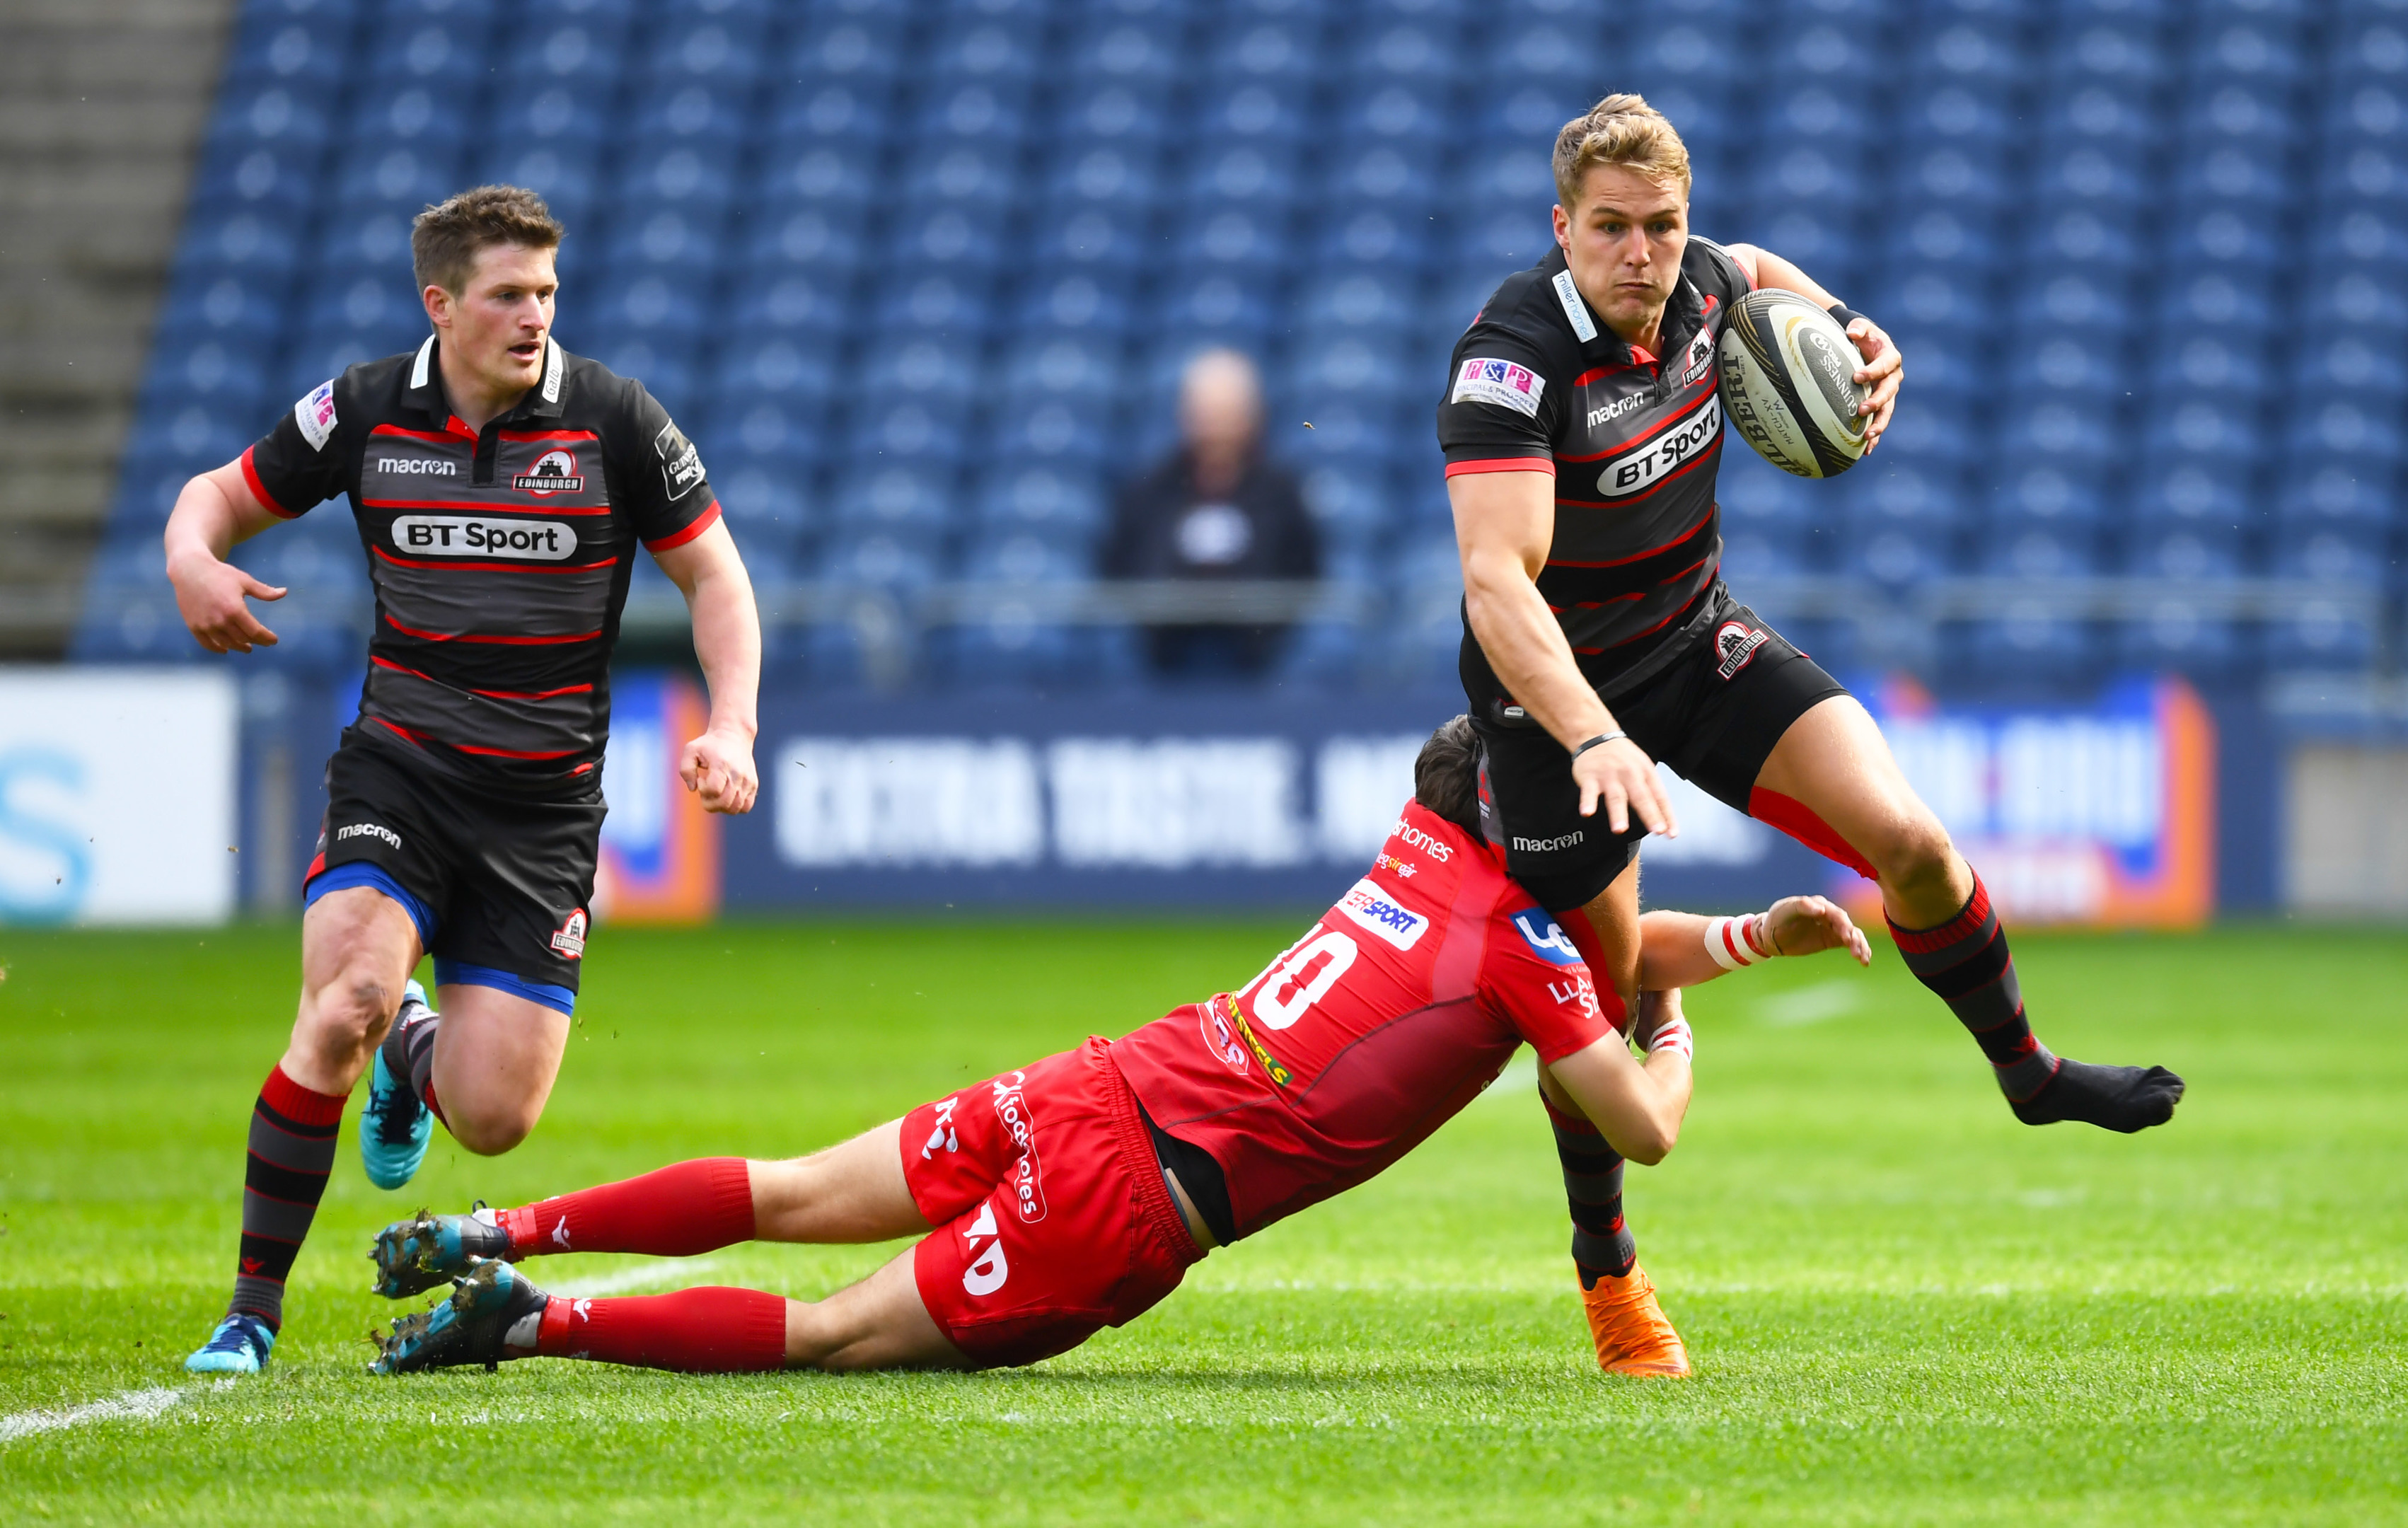 Duhan van der Merwe charges through tackles for his first try at Murrayfield.